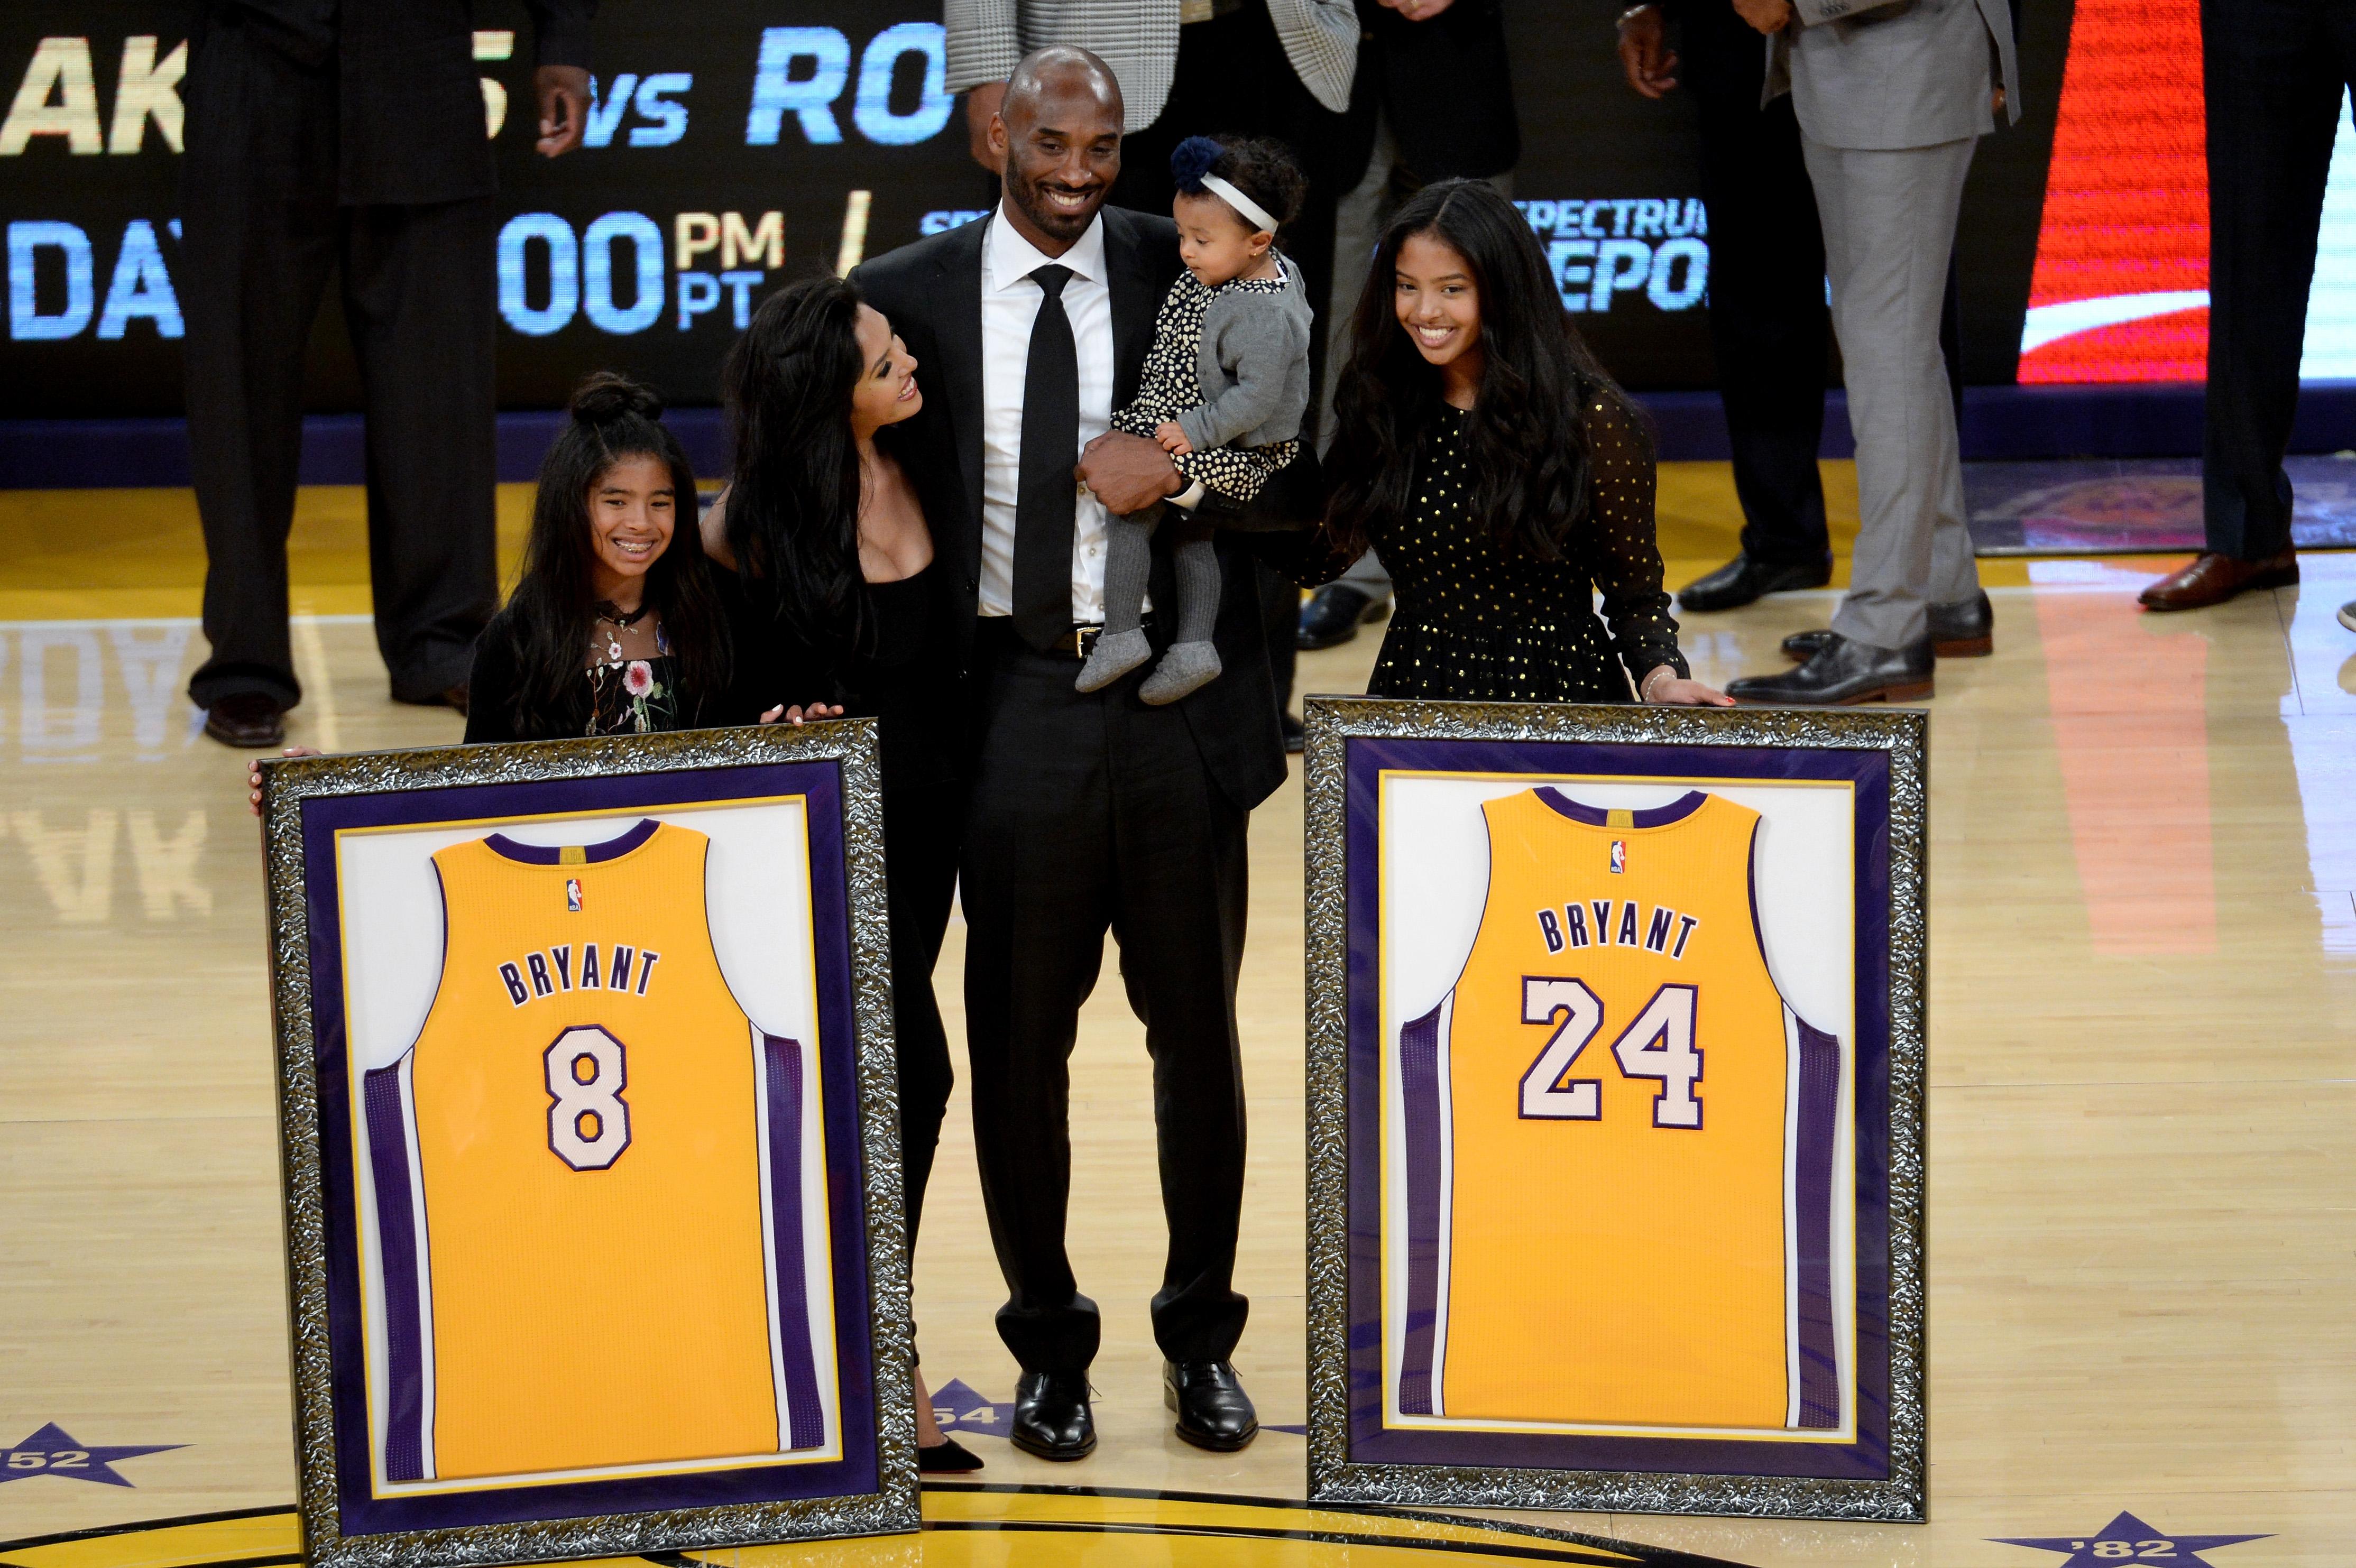 Kobe Bryant Jersey Retirement. Copyright: Getty Images